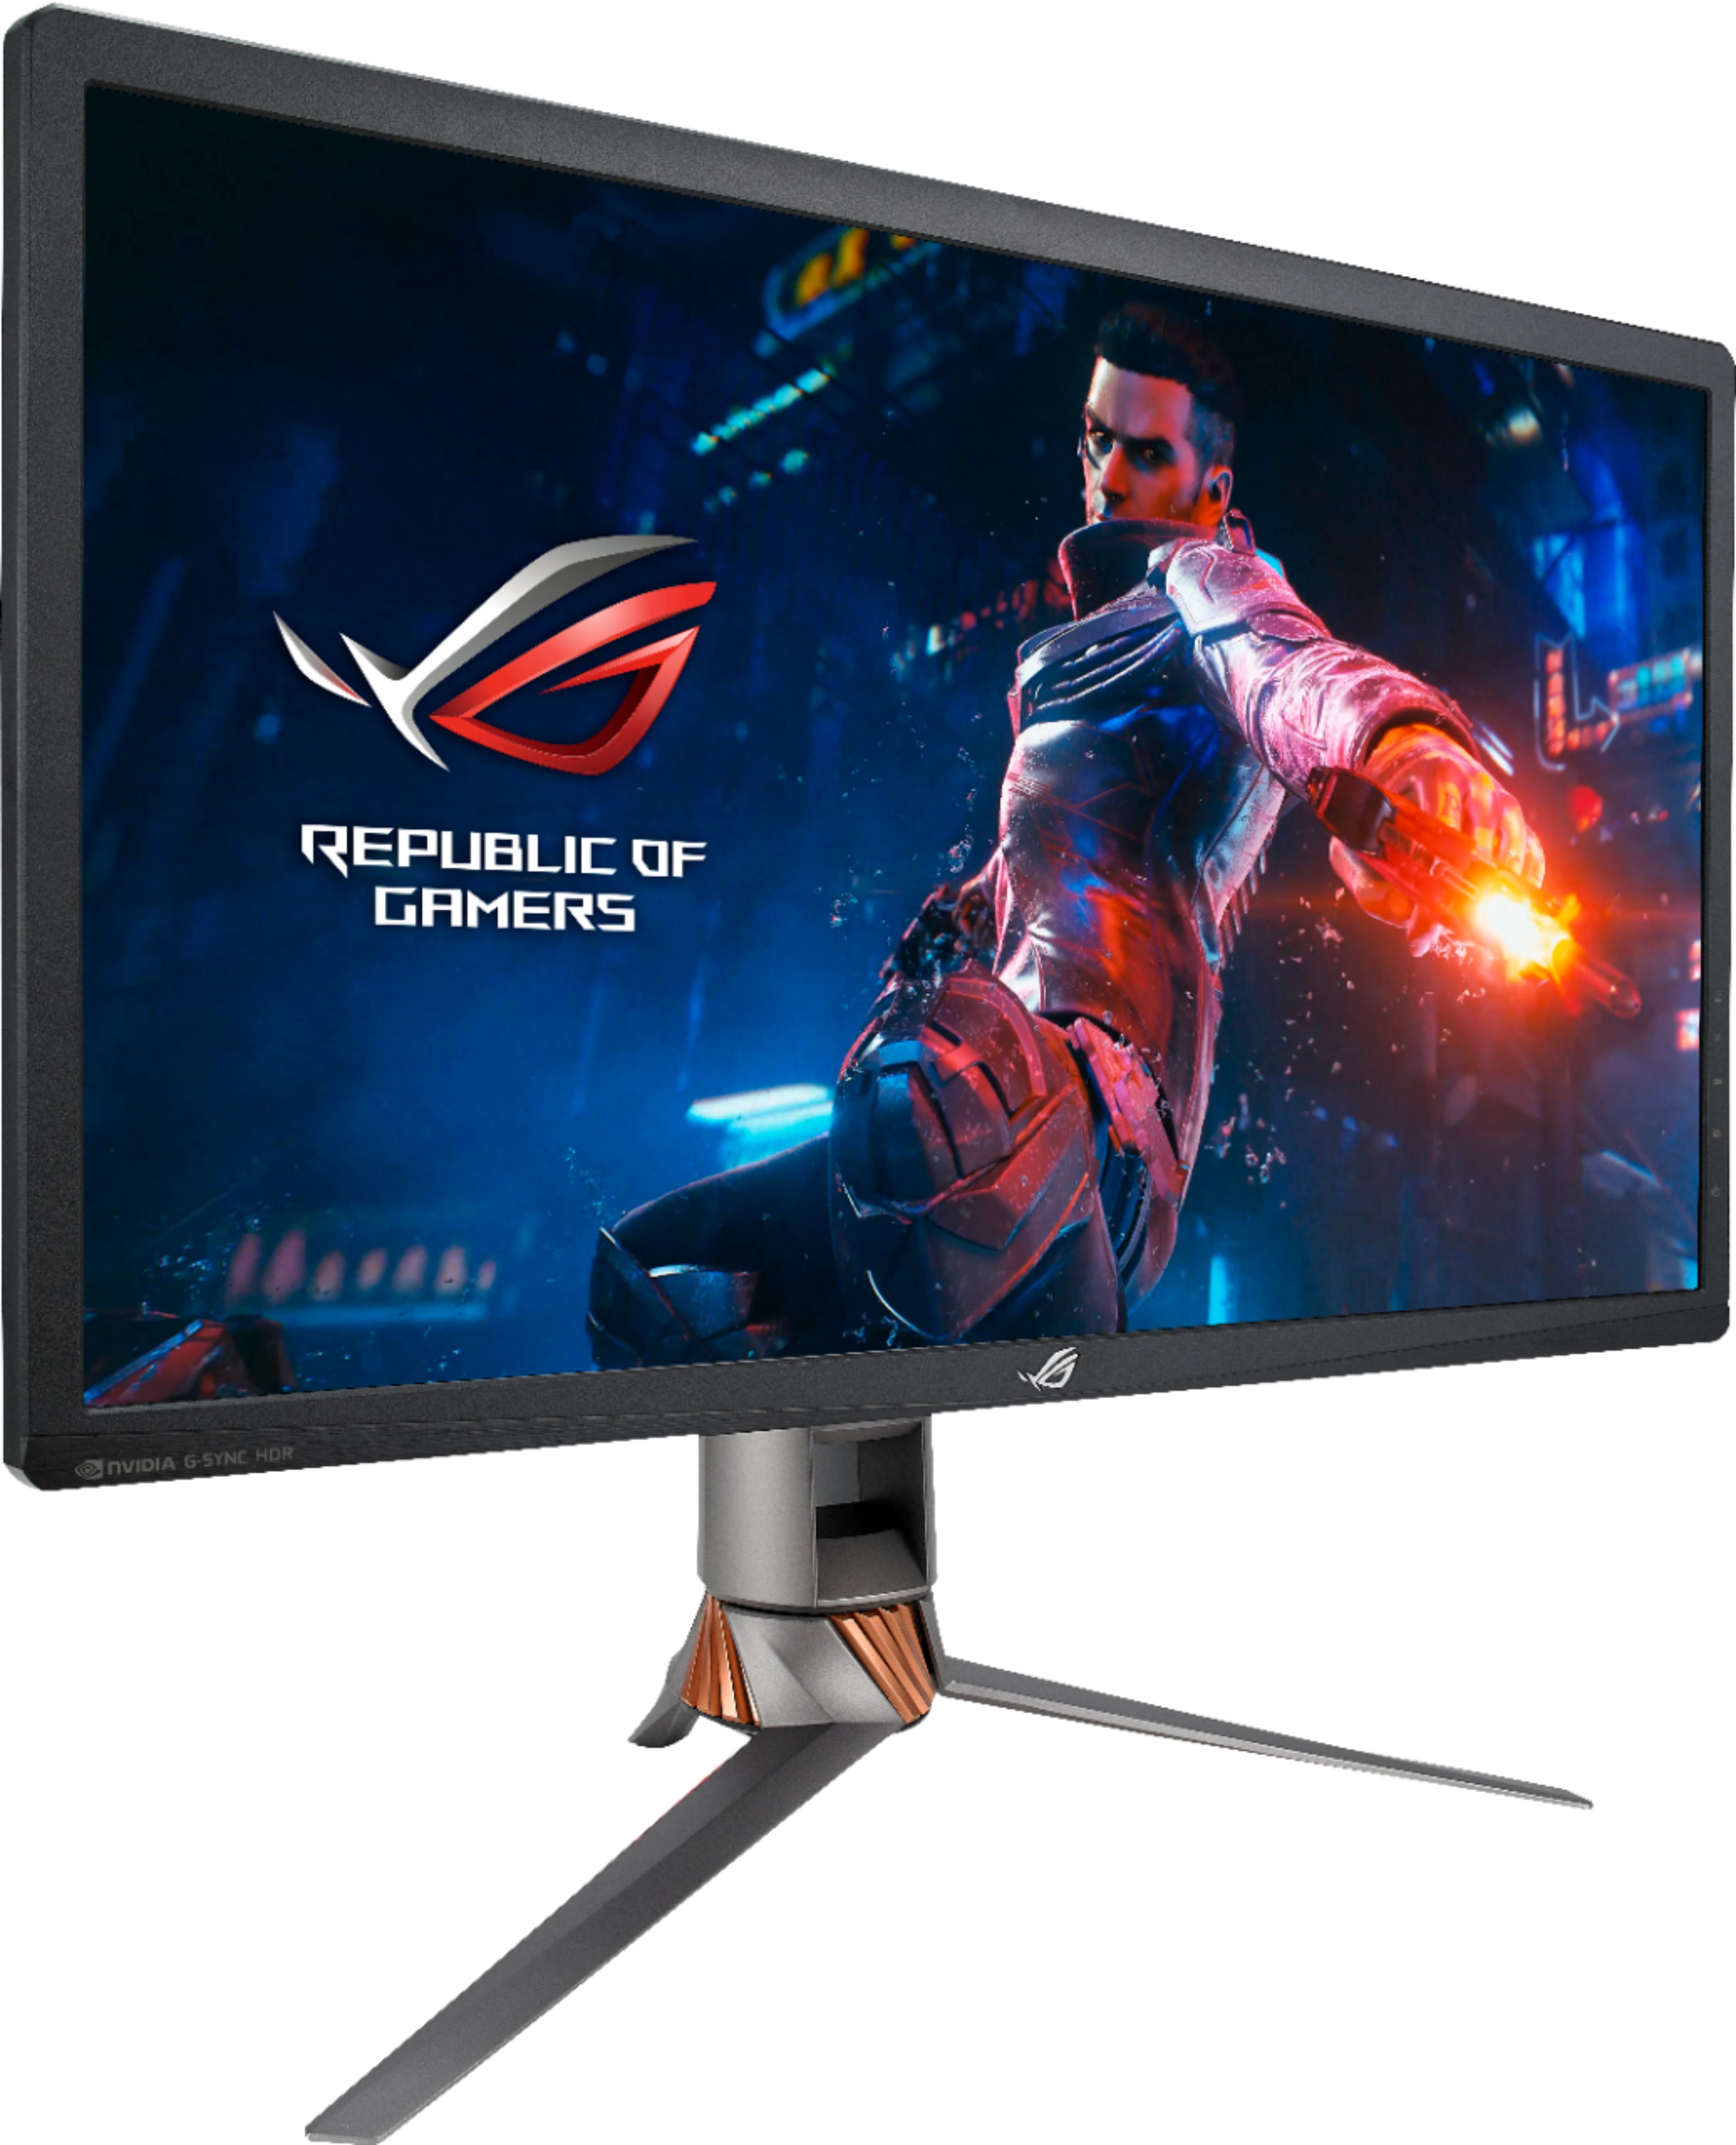 Angle View: LG - Geek Squad Certified Refurbished UltraGear 27" IPS LCD 4K UHD FreeSync and G-SYNC Compatible Monitor with HDR - Black